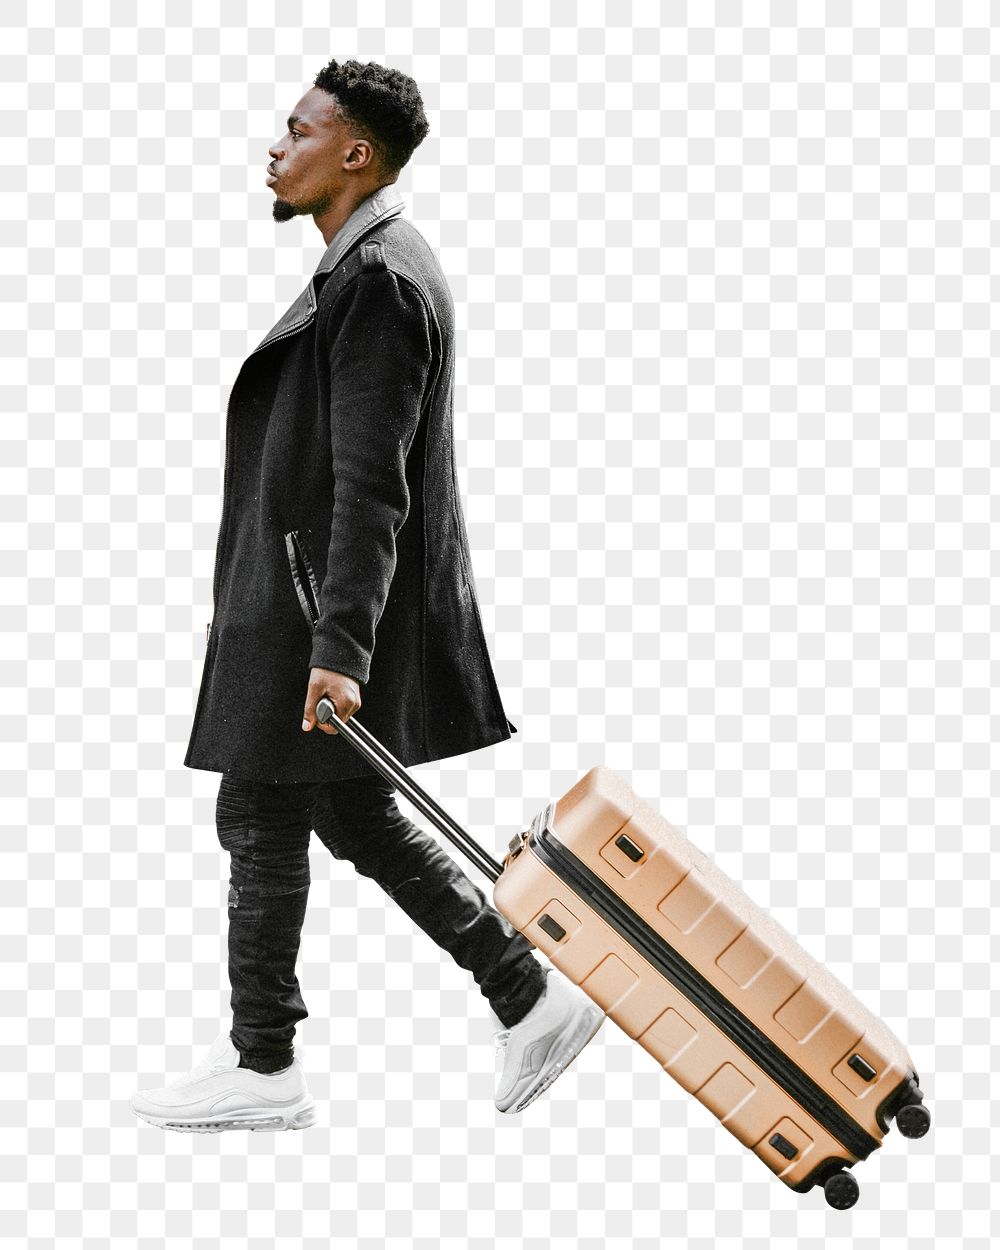 Tourist walking with suitcase png, transparent background